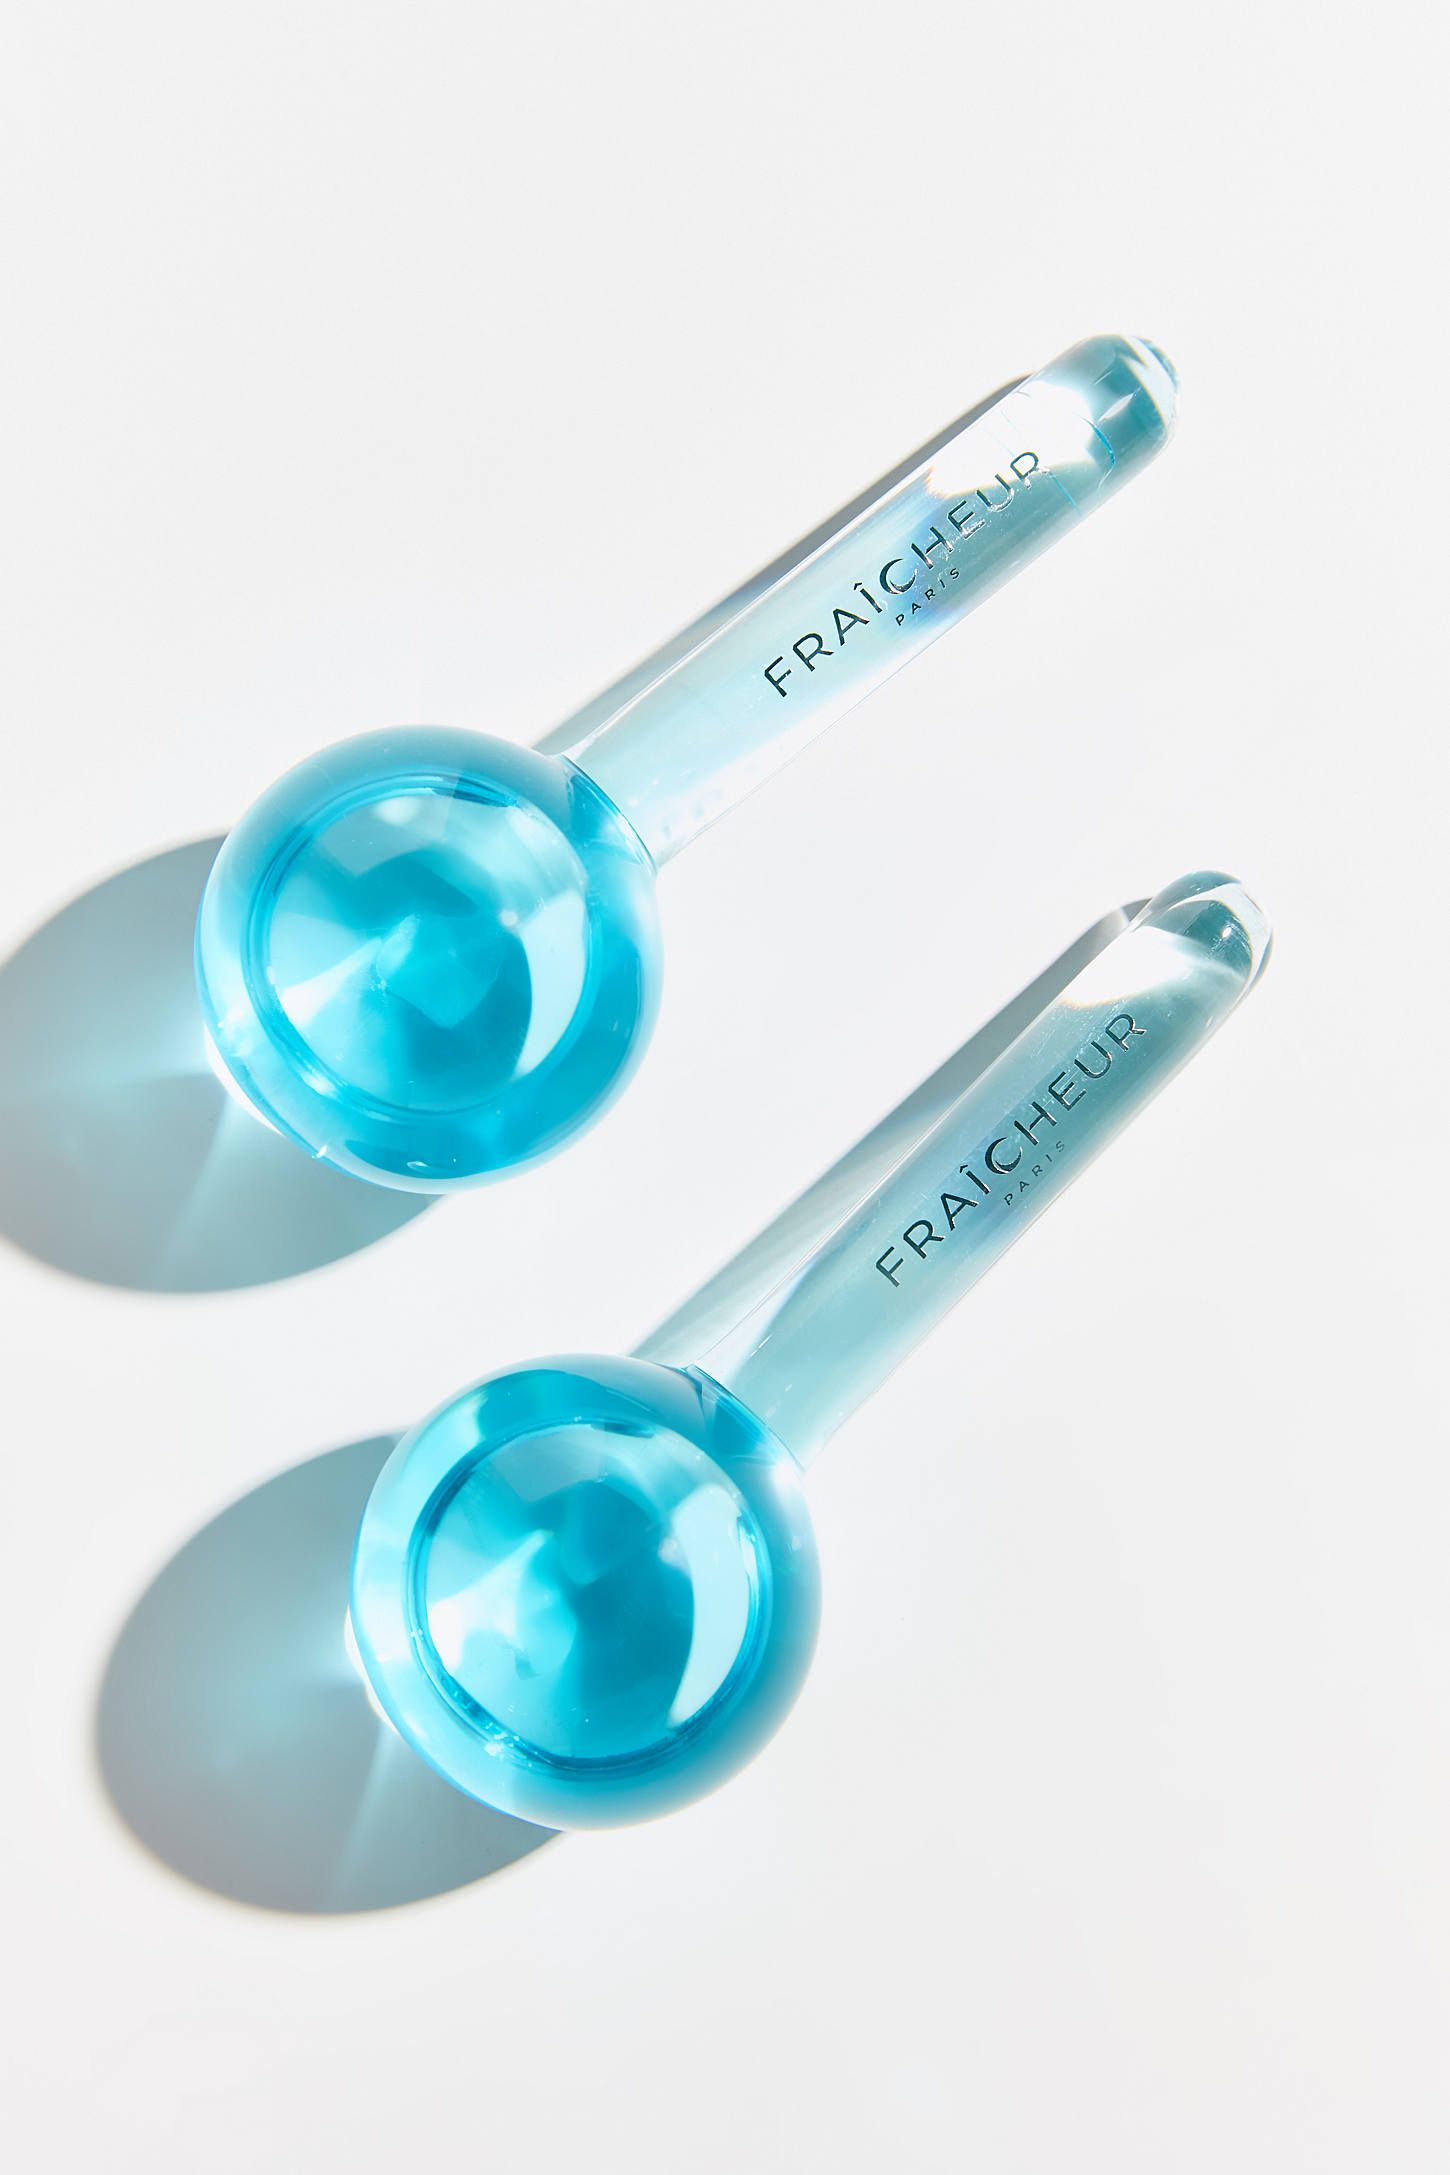 Fraîcheur Ice Globes Cooling Facial Tool Collection